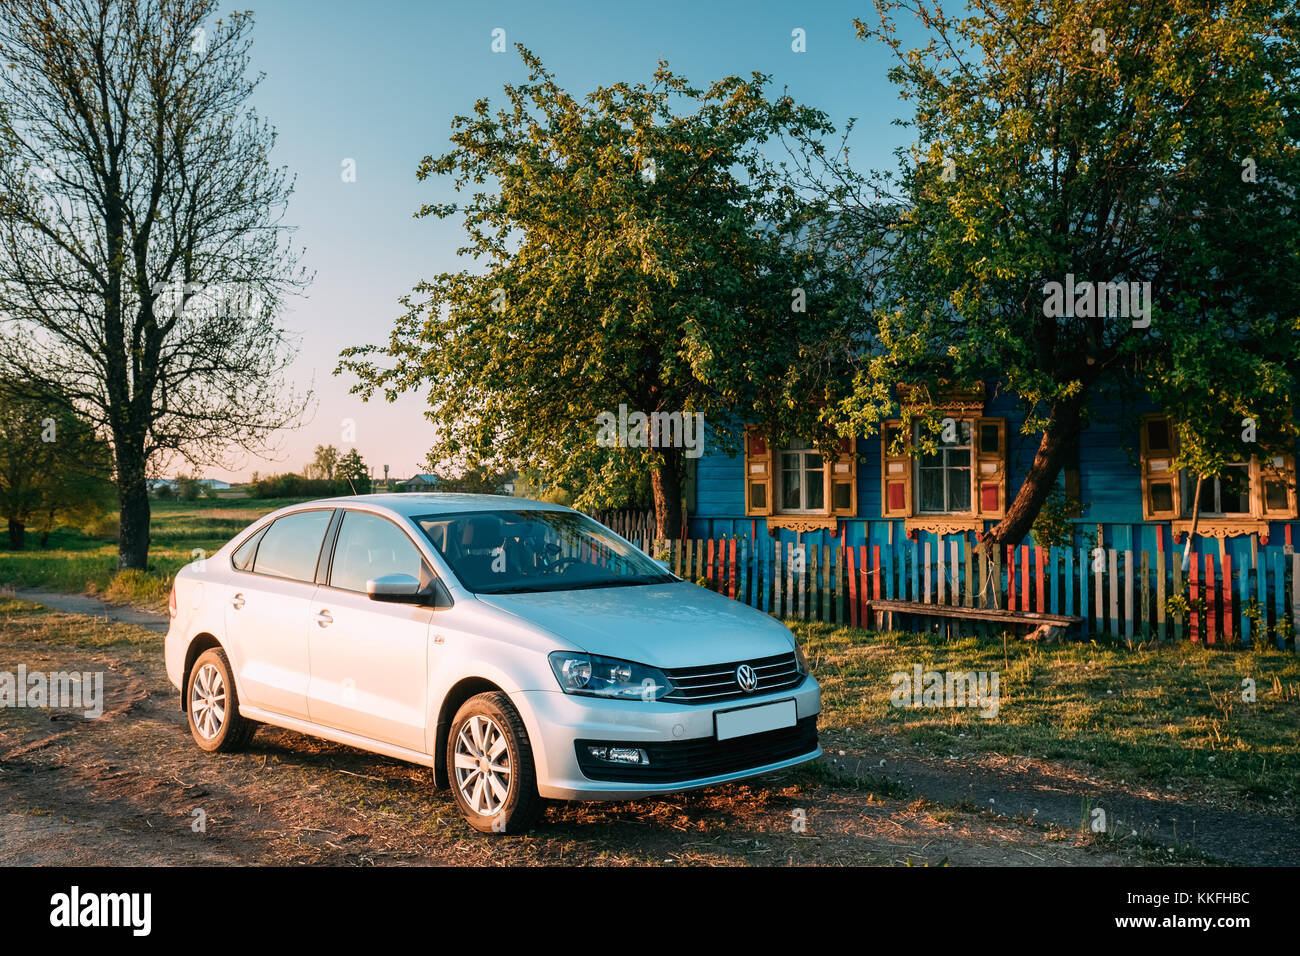 Krasnyy Partizan - May 16, 2017: VW Volkswagen Polo Vento Sedan Car Parking Near Traditional Russian Wooden Old House In Village. Sunny Evening In Cou Stock Photo